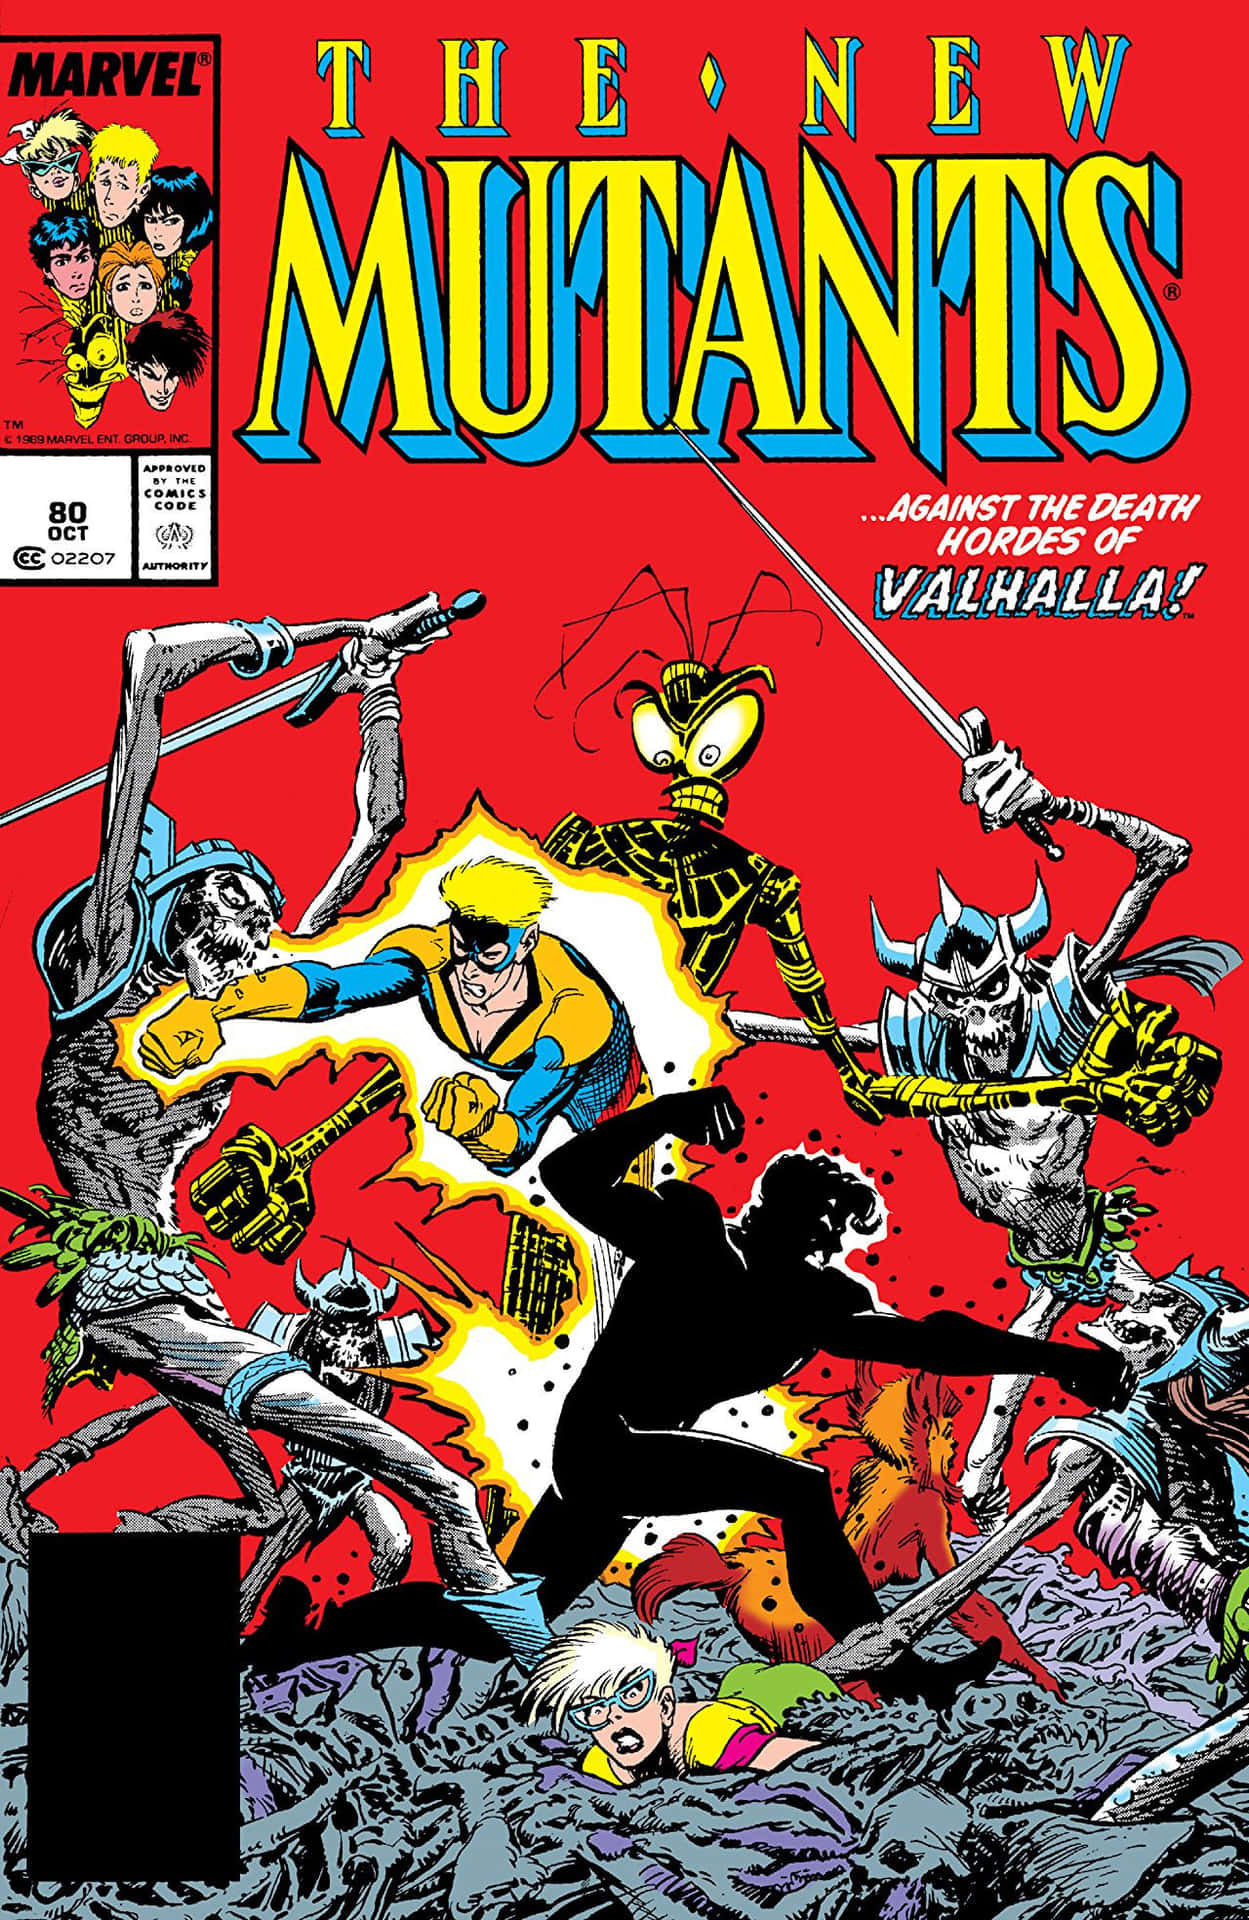 A thrilling group of mutants showcasing their incredible powers. Wallpaper